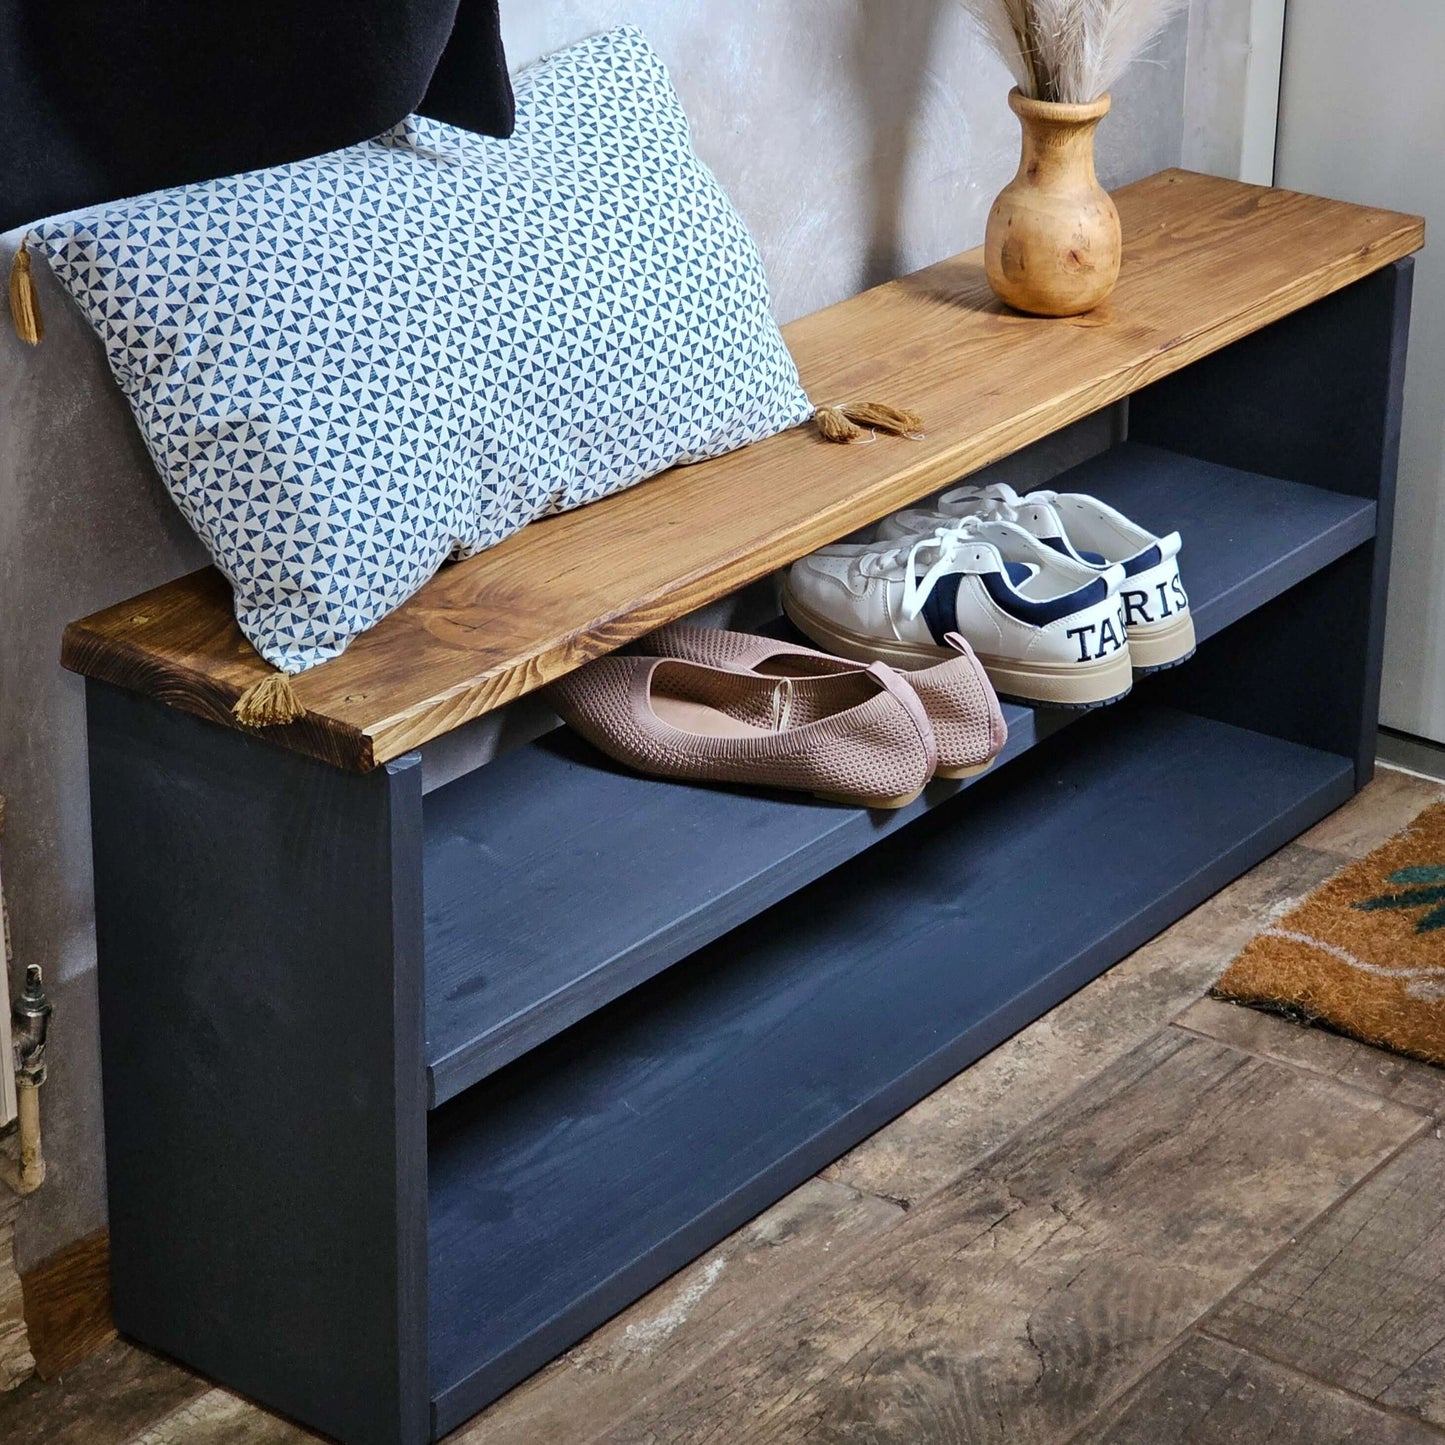 Wooden Shoe Storage Bench Narrow - 114 cm by 22 cm by 50 cm